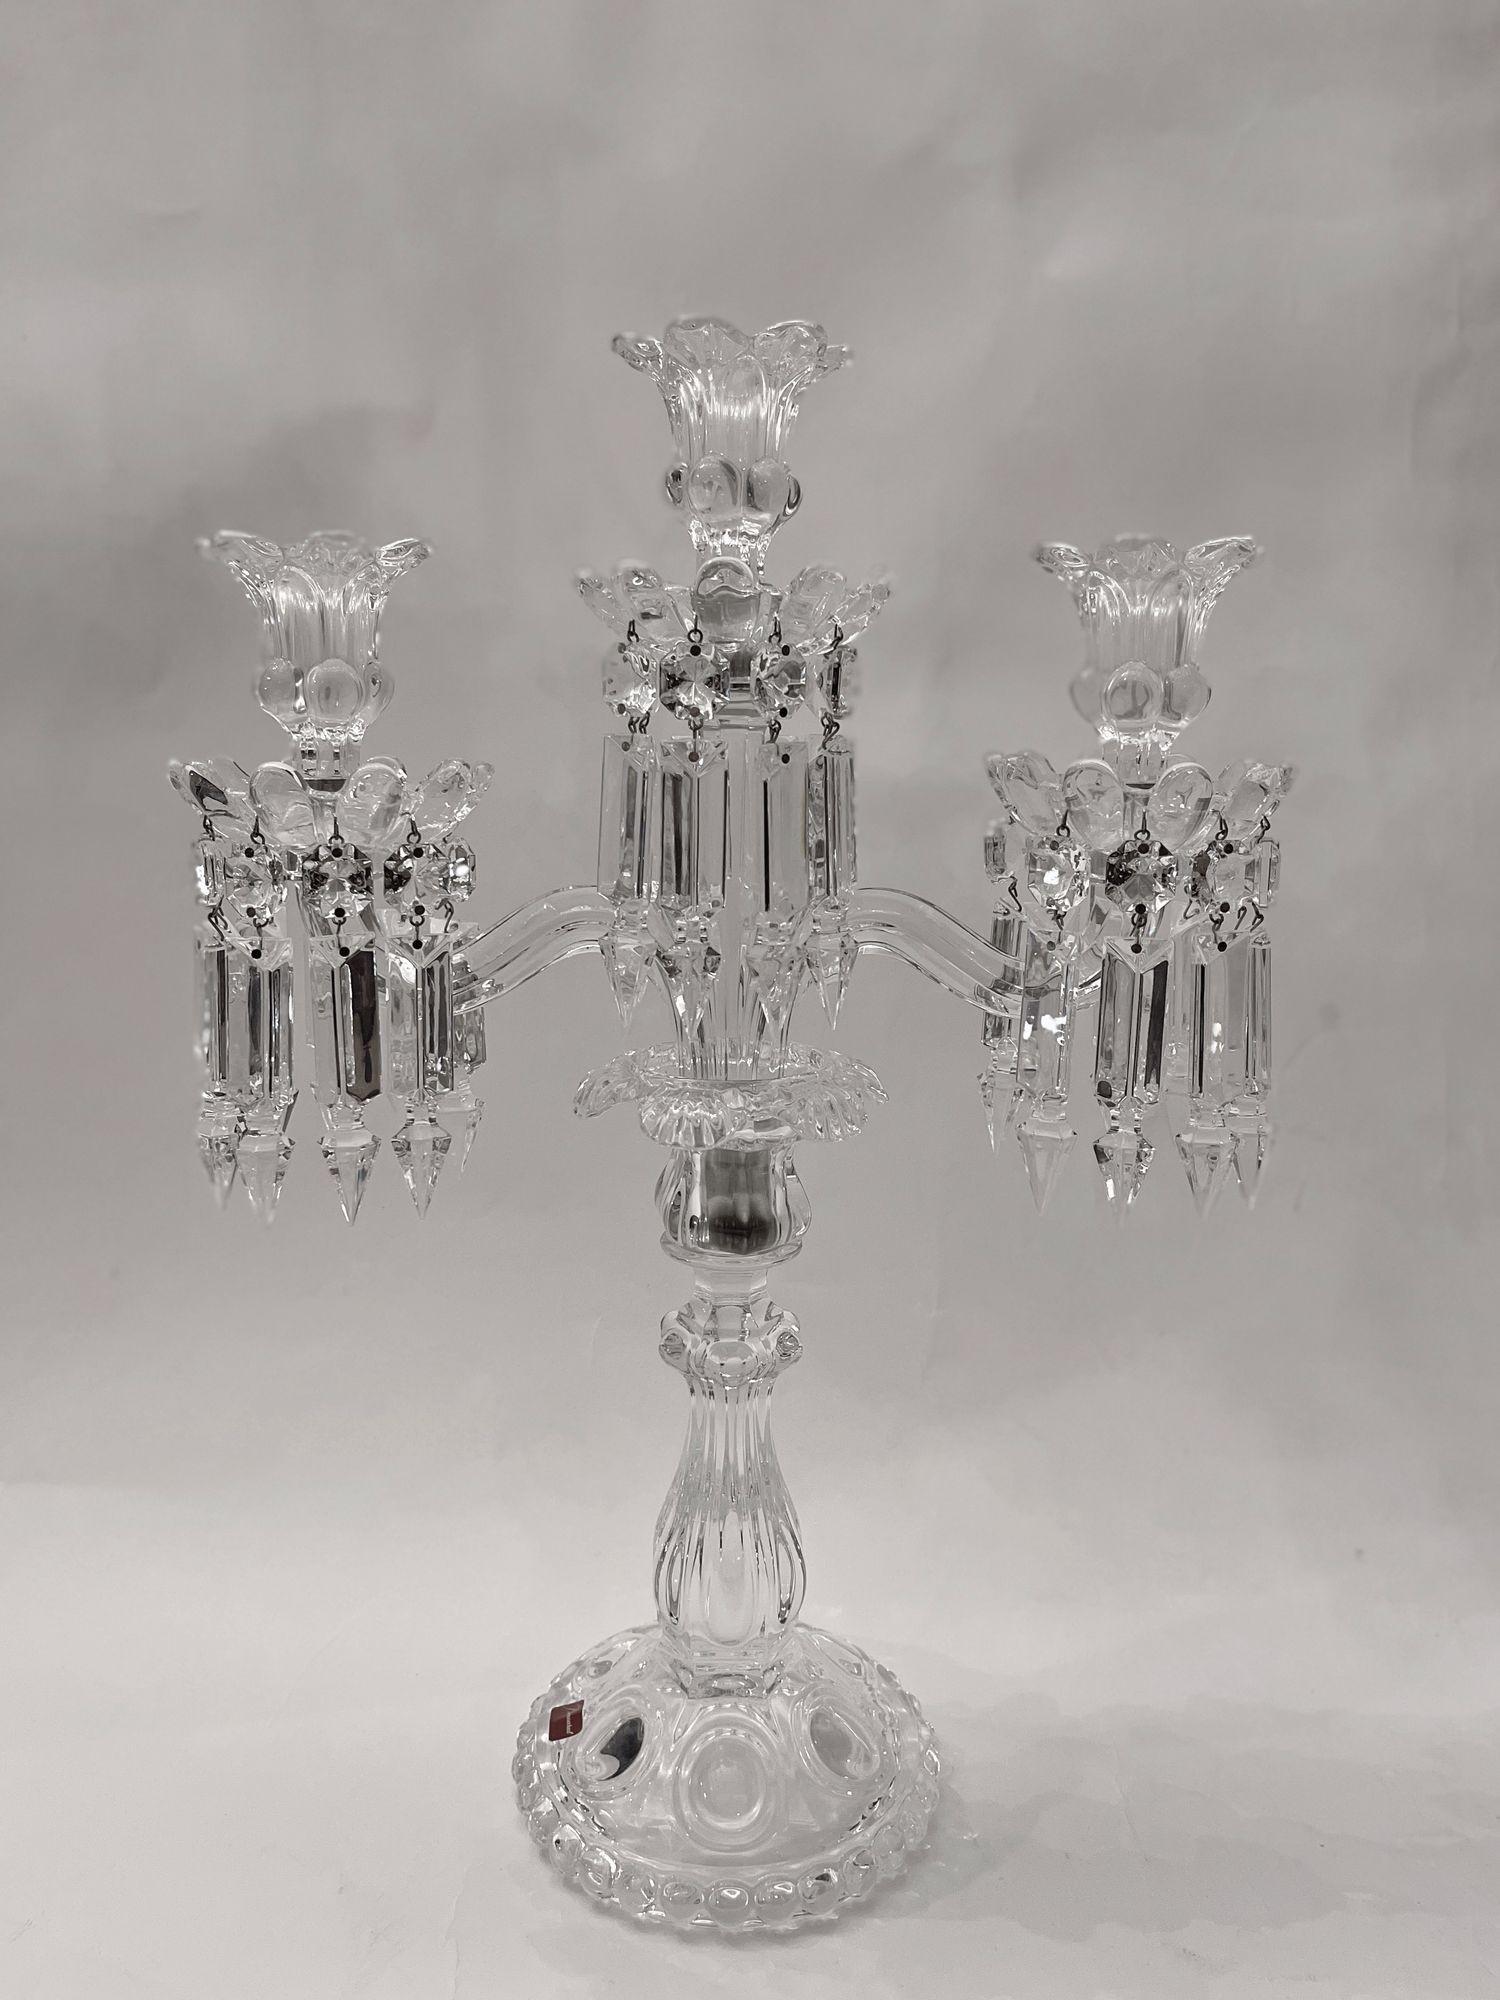 French Provincial Pair of Mid-Century Modern Neoclassical Glass Obelisk Candelabras by Baccarat For Sale